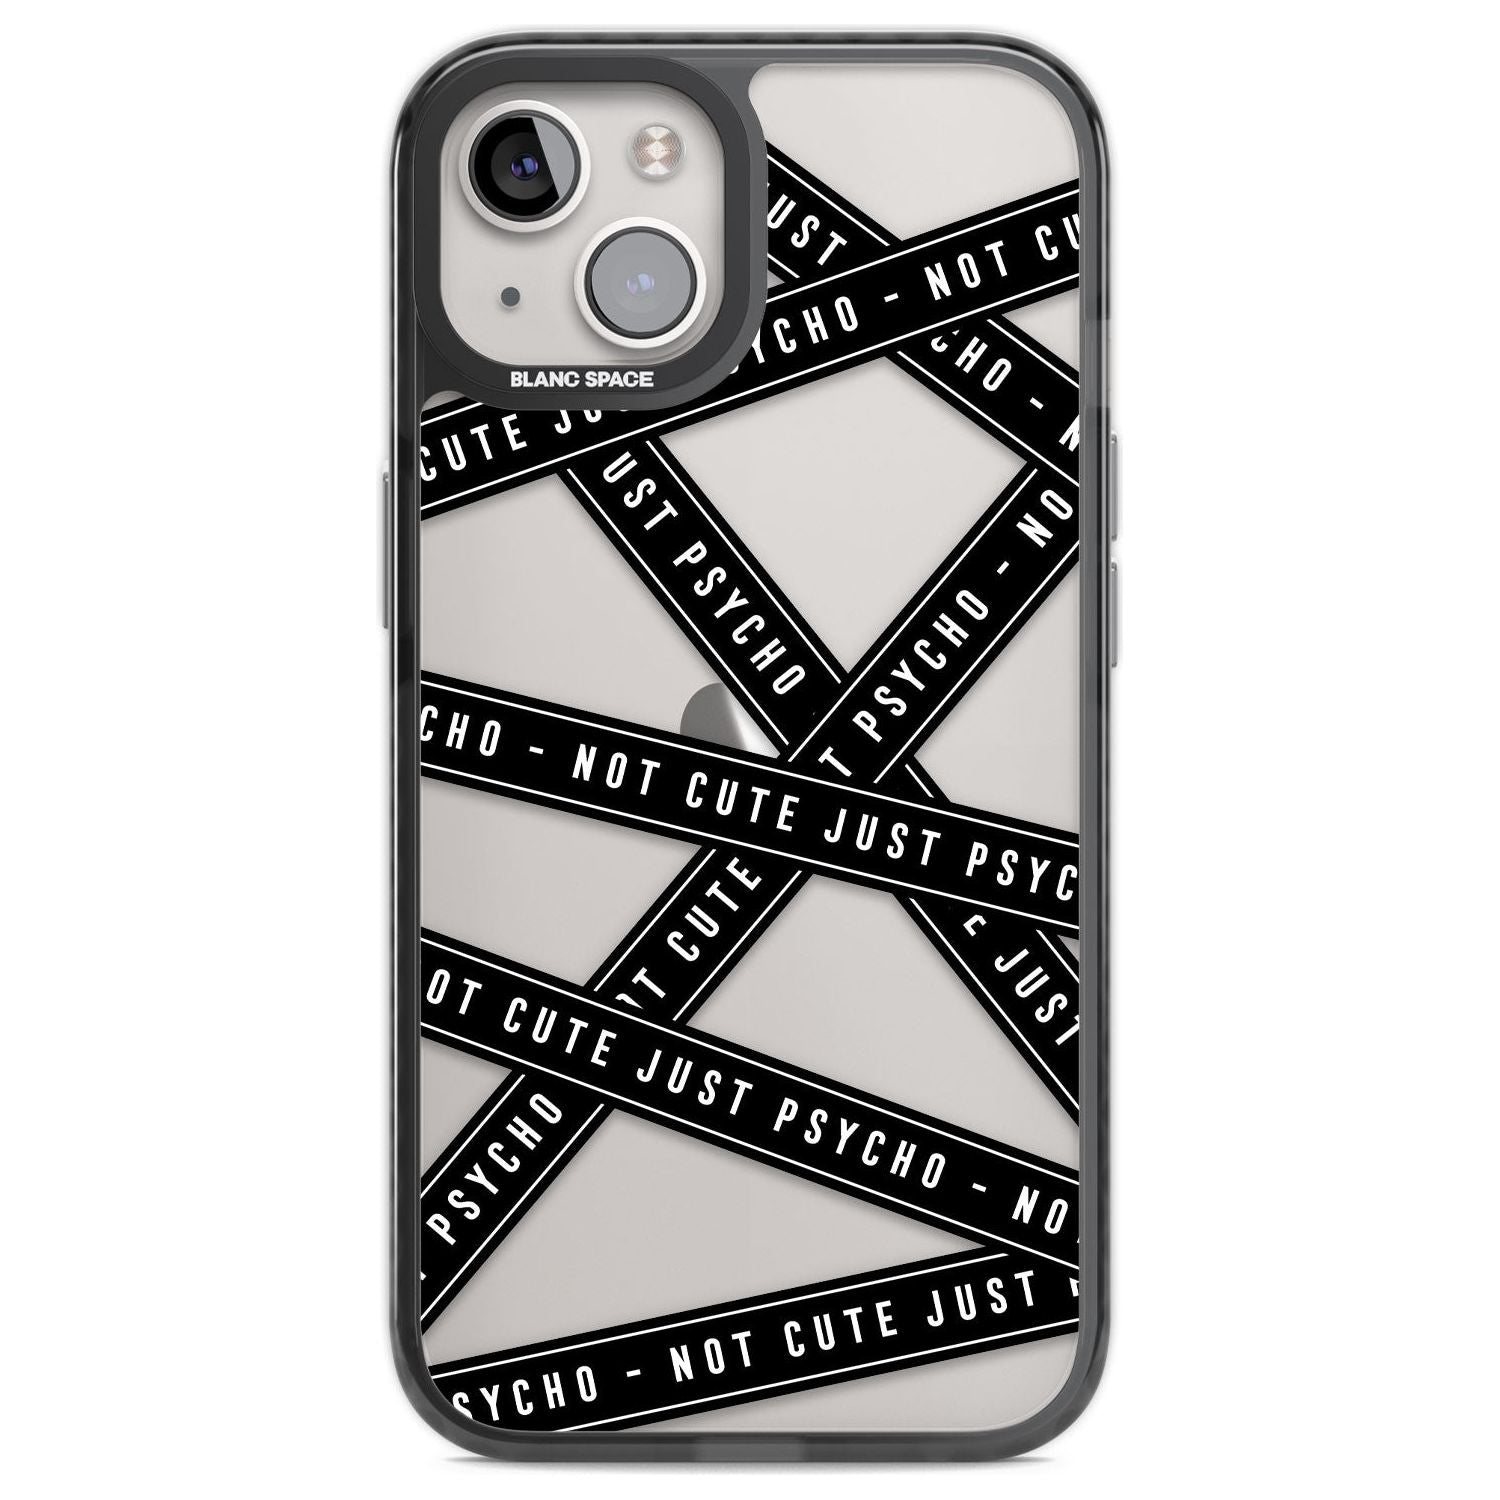 Caution Tape (Clear) Not Cute Just Psycho Phone Case iPhone 12 / Black Impact Case,iPhone 13 / Black Impact Case,iPhone 12 Pro / Black Impact Case,iPhone 14 / Black Impact Case,iPhone 15 Plus / Black Impact Case,iPhone 15 / Black Impact Case Blanc Space